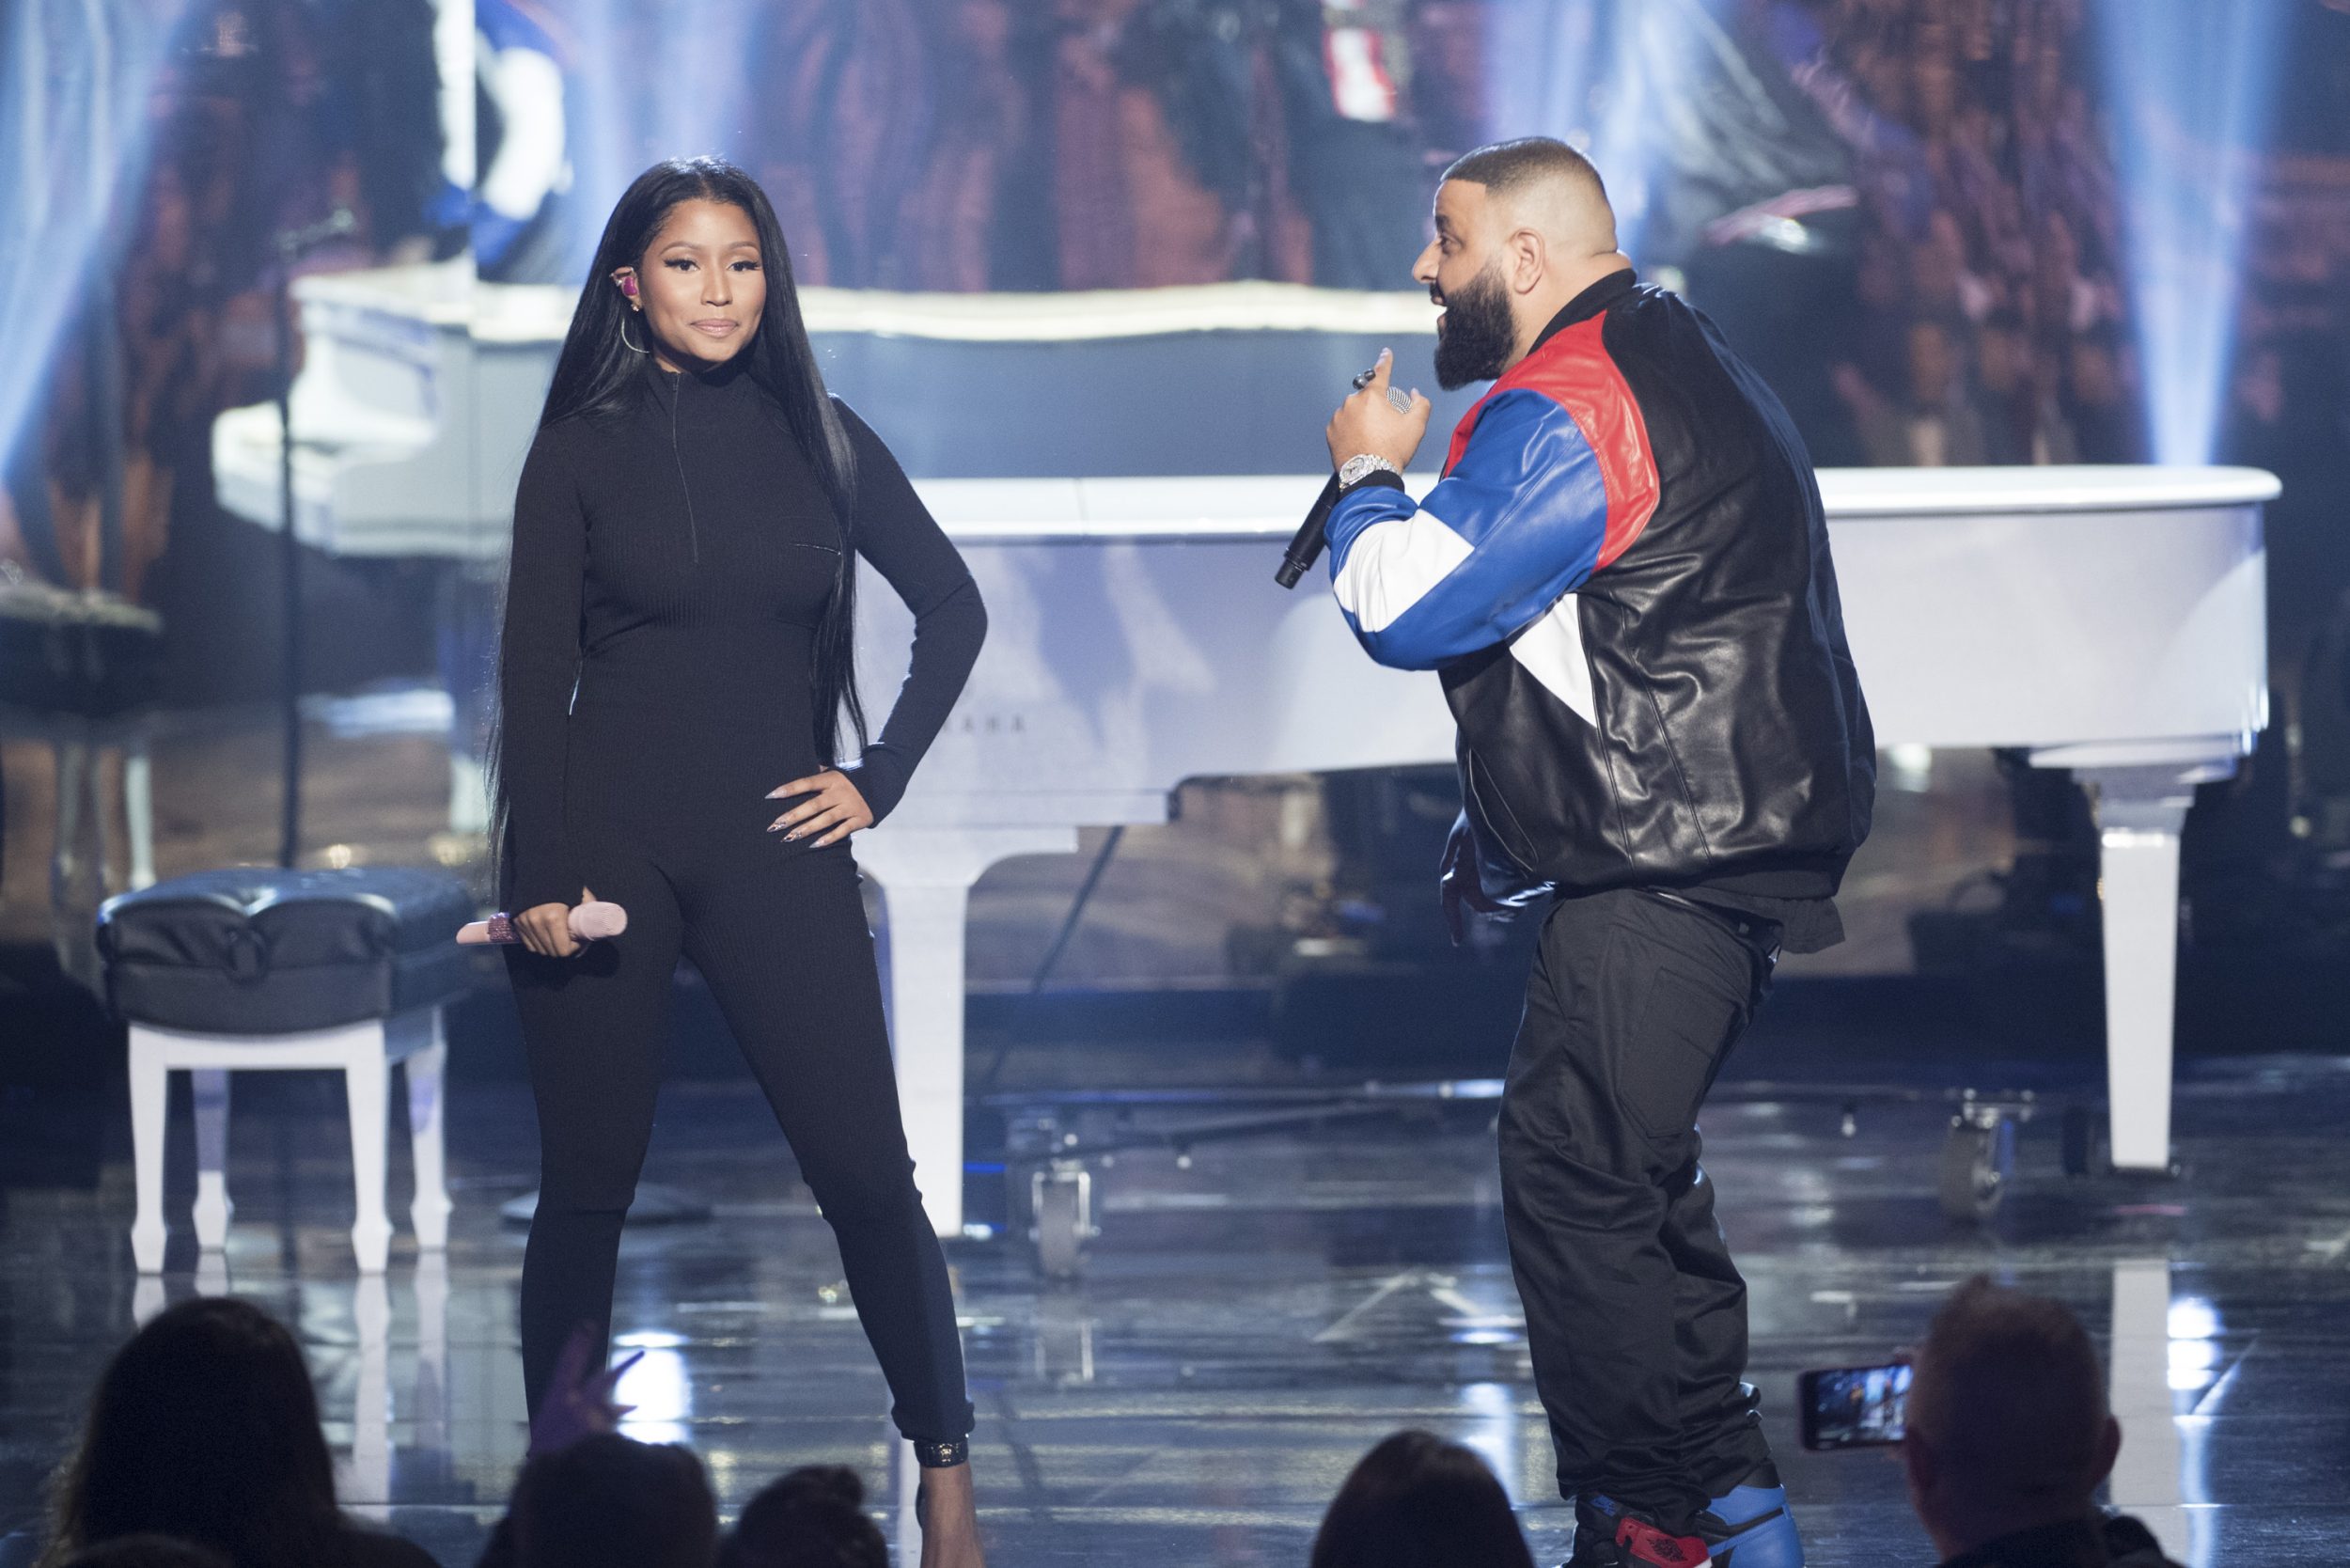 THE 2016 AMERICAN MUSIC AWARDS(r) - The “2016 American Music Awards,” the world’s biggest fan-voted award show, broadcasts live from the Microsoft Theater in Los Angeles on SUNDAY, NOVEMBER 20, at 8:00 p.m. EST, on ABC. (Image Group LA/ABC) NICKI MINAJ, DJ KHALED